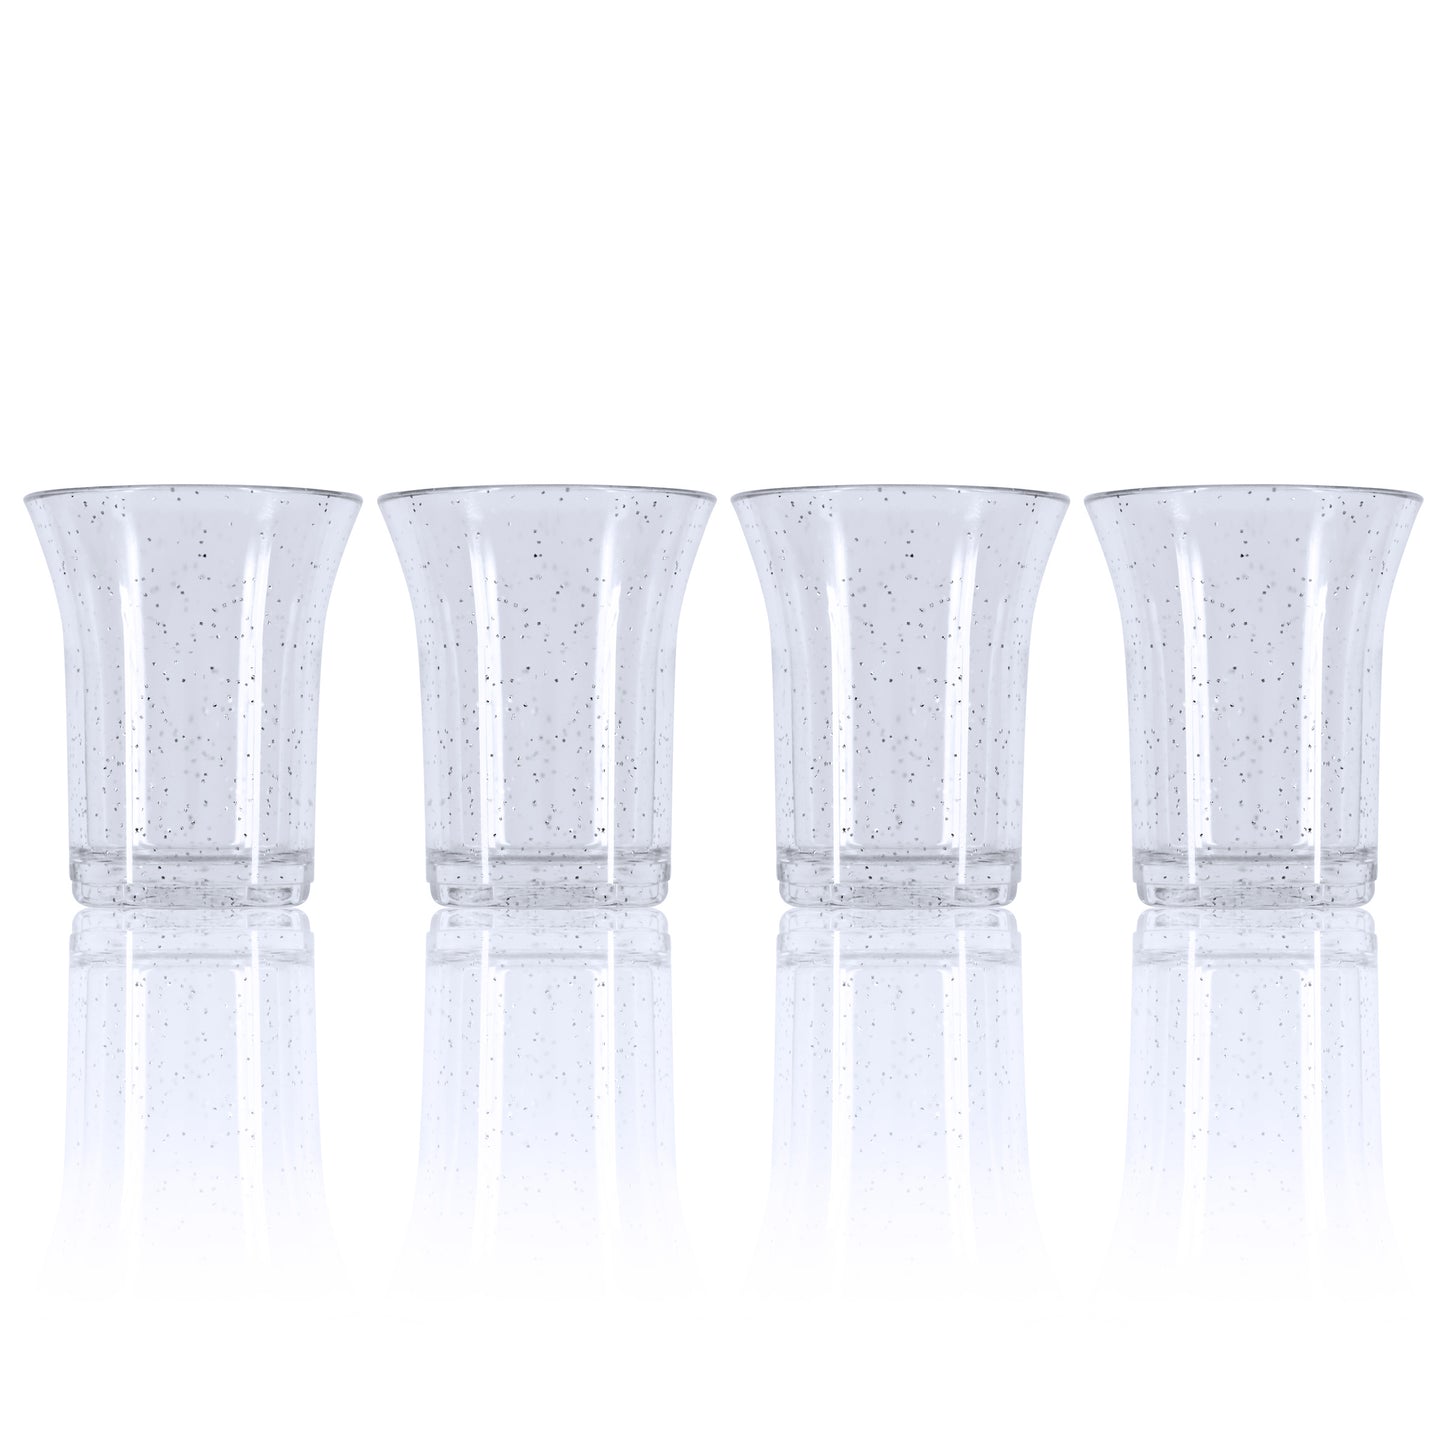 10 x Silver Glitter Shot Glasses - Heavy Duty Strong Reusable Plastic 25ml 30ml Stackable. Dishwasher Safe Christmas, Anniversaries, Sparkly-5056020186915-PCUP-SHOT-SG-10-Product Pro-Anniversary, Christmas, Glitter Shot Glasses, Gold, Shot Glasses, Shots, Silver Glitter